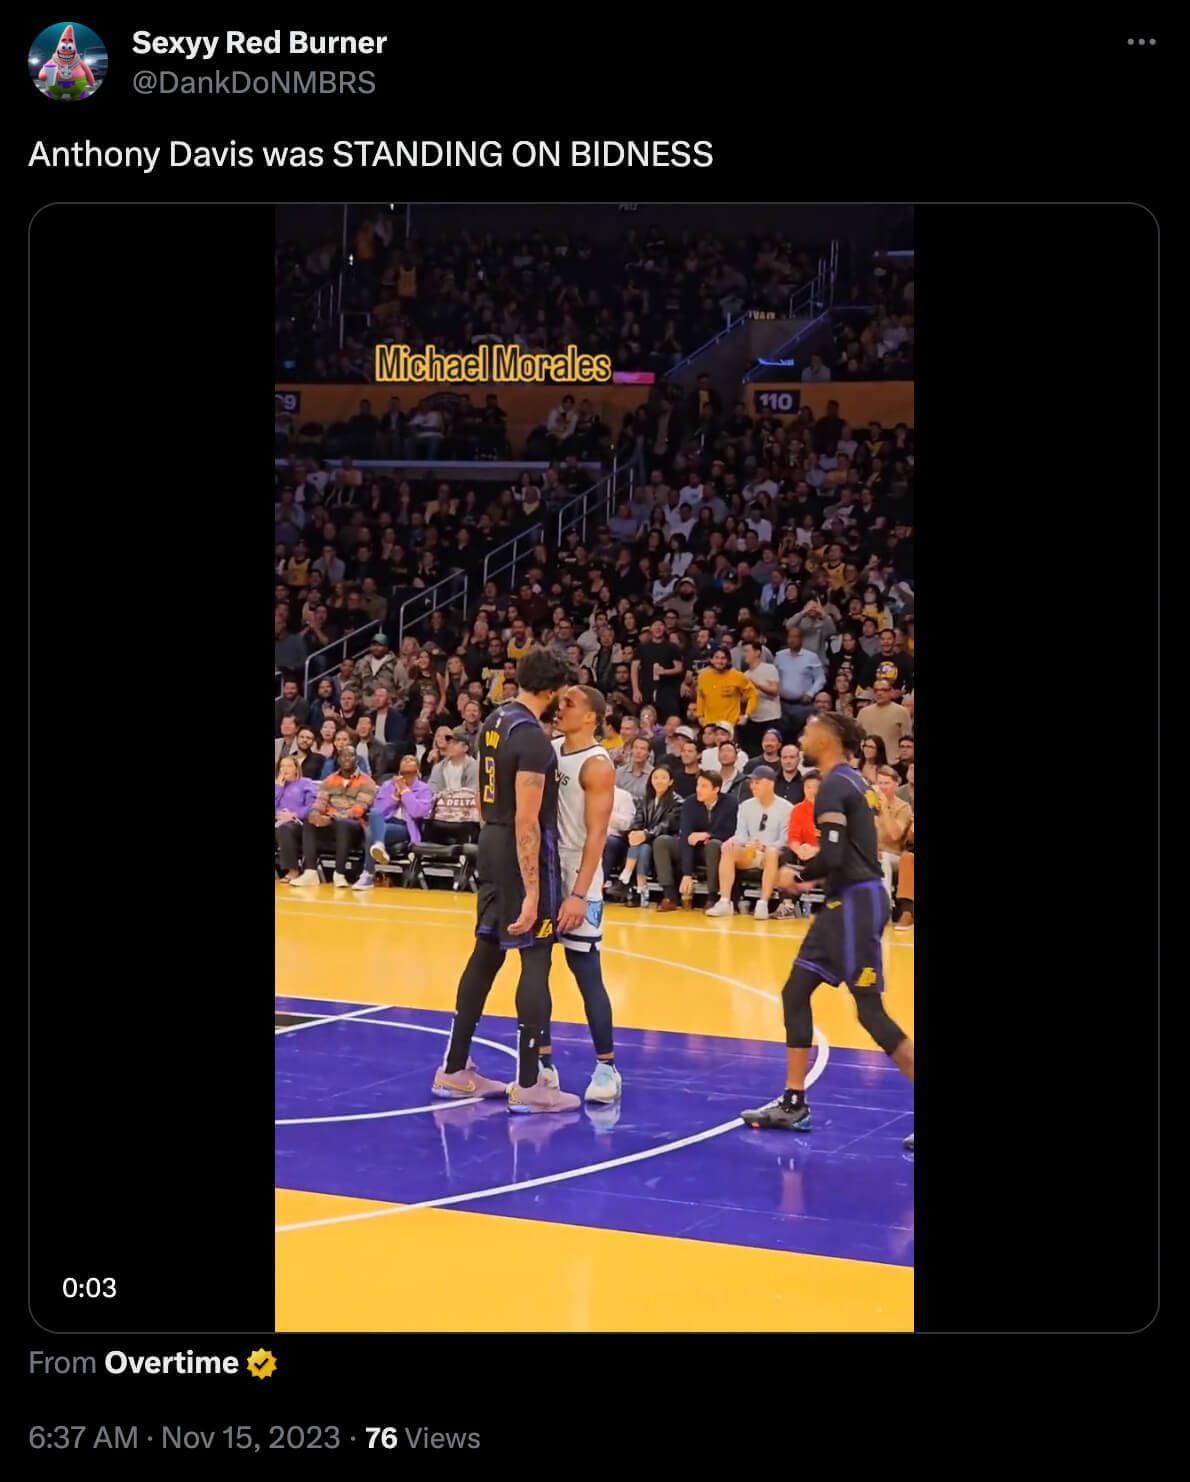 Paot about Anthony Davis standing on bidness